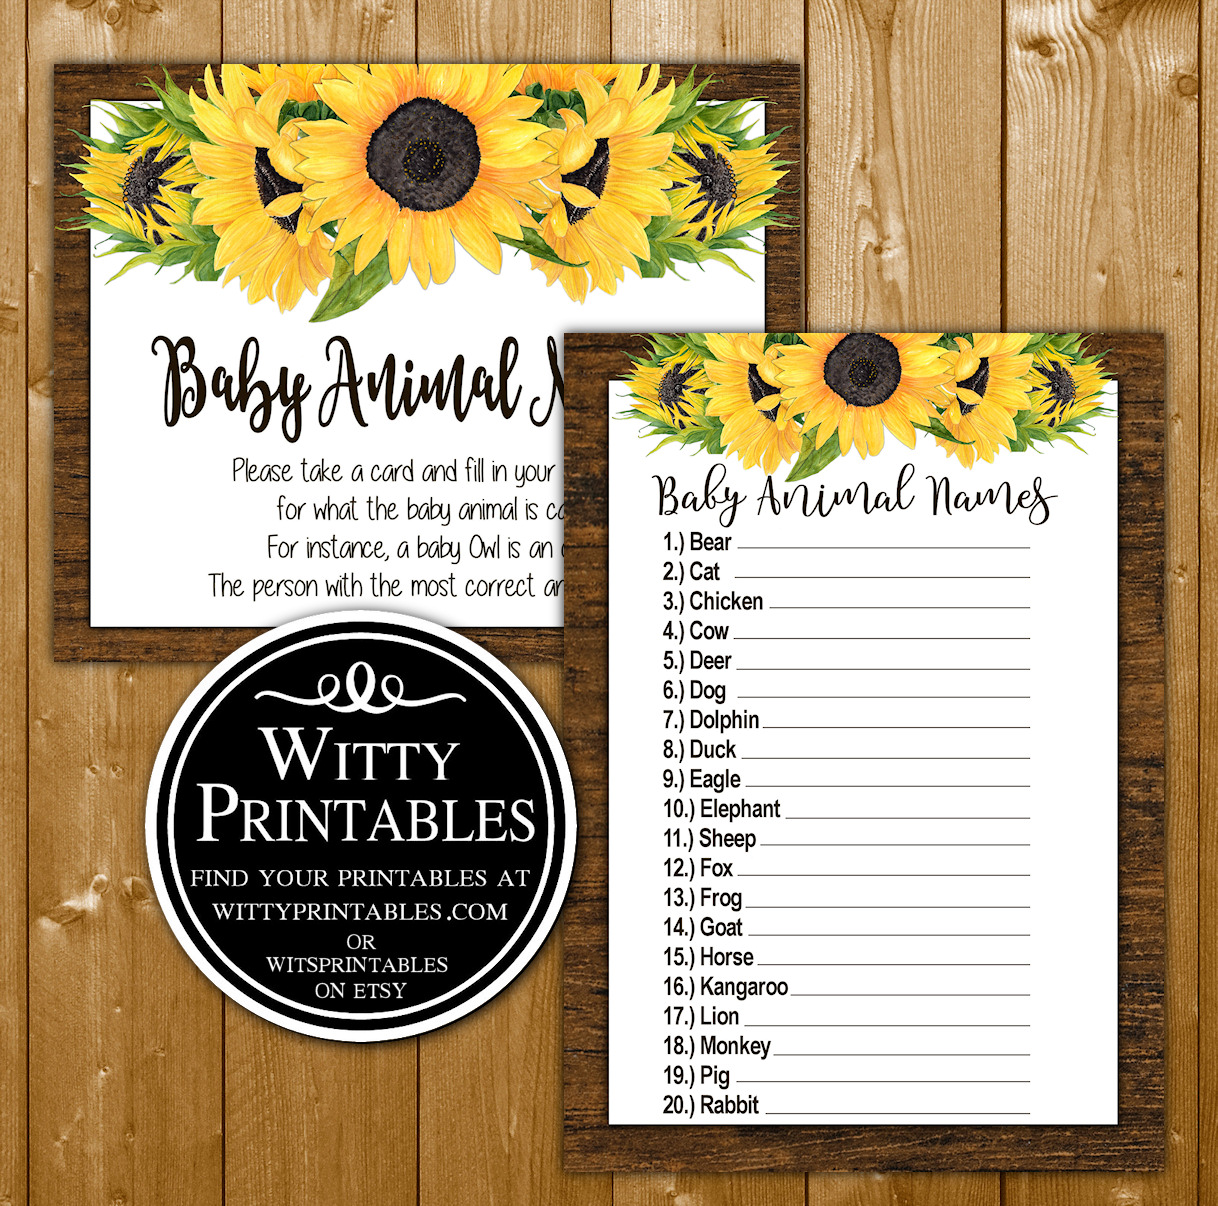 Baby Animal Names Shower Game Sunflowers Theme Wittyprintables